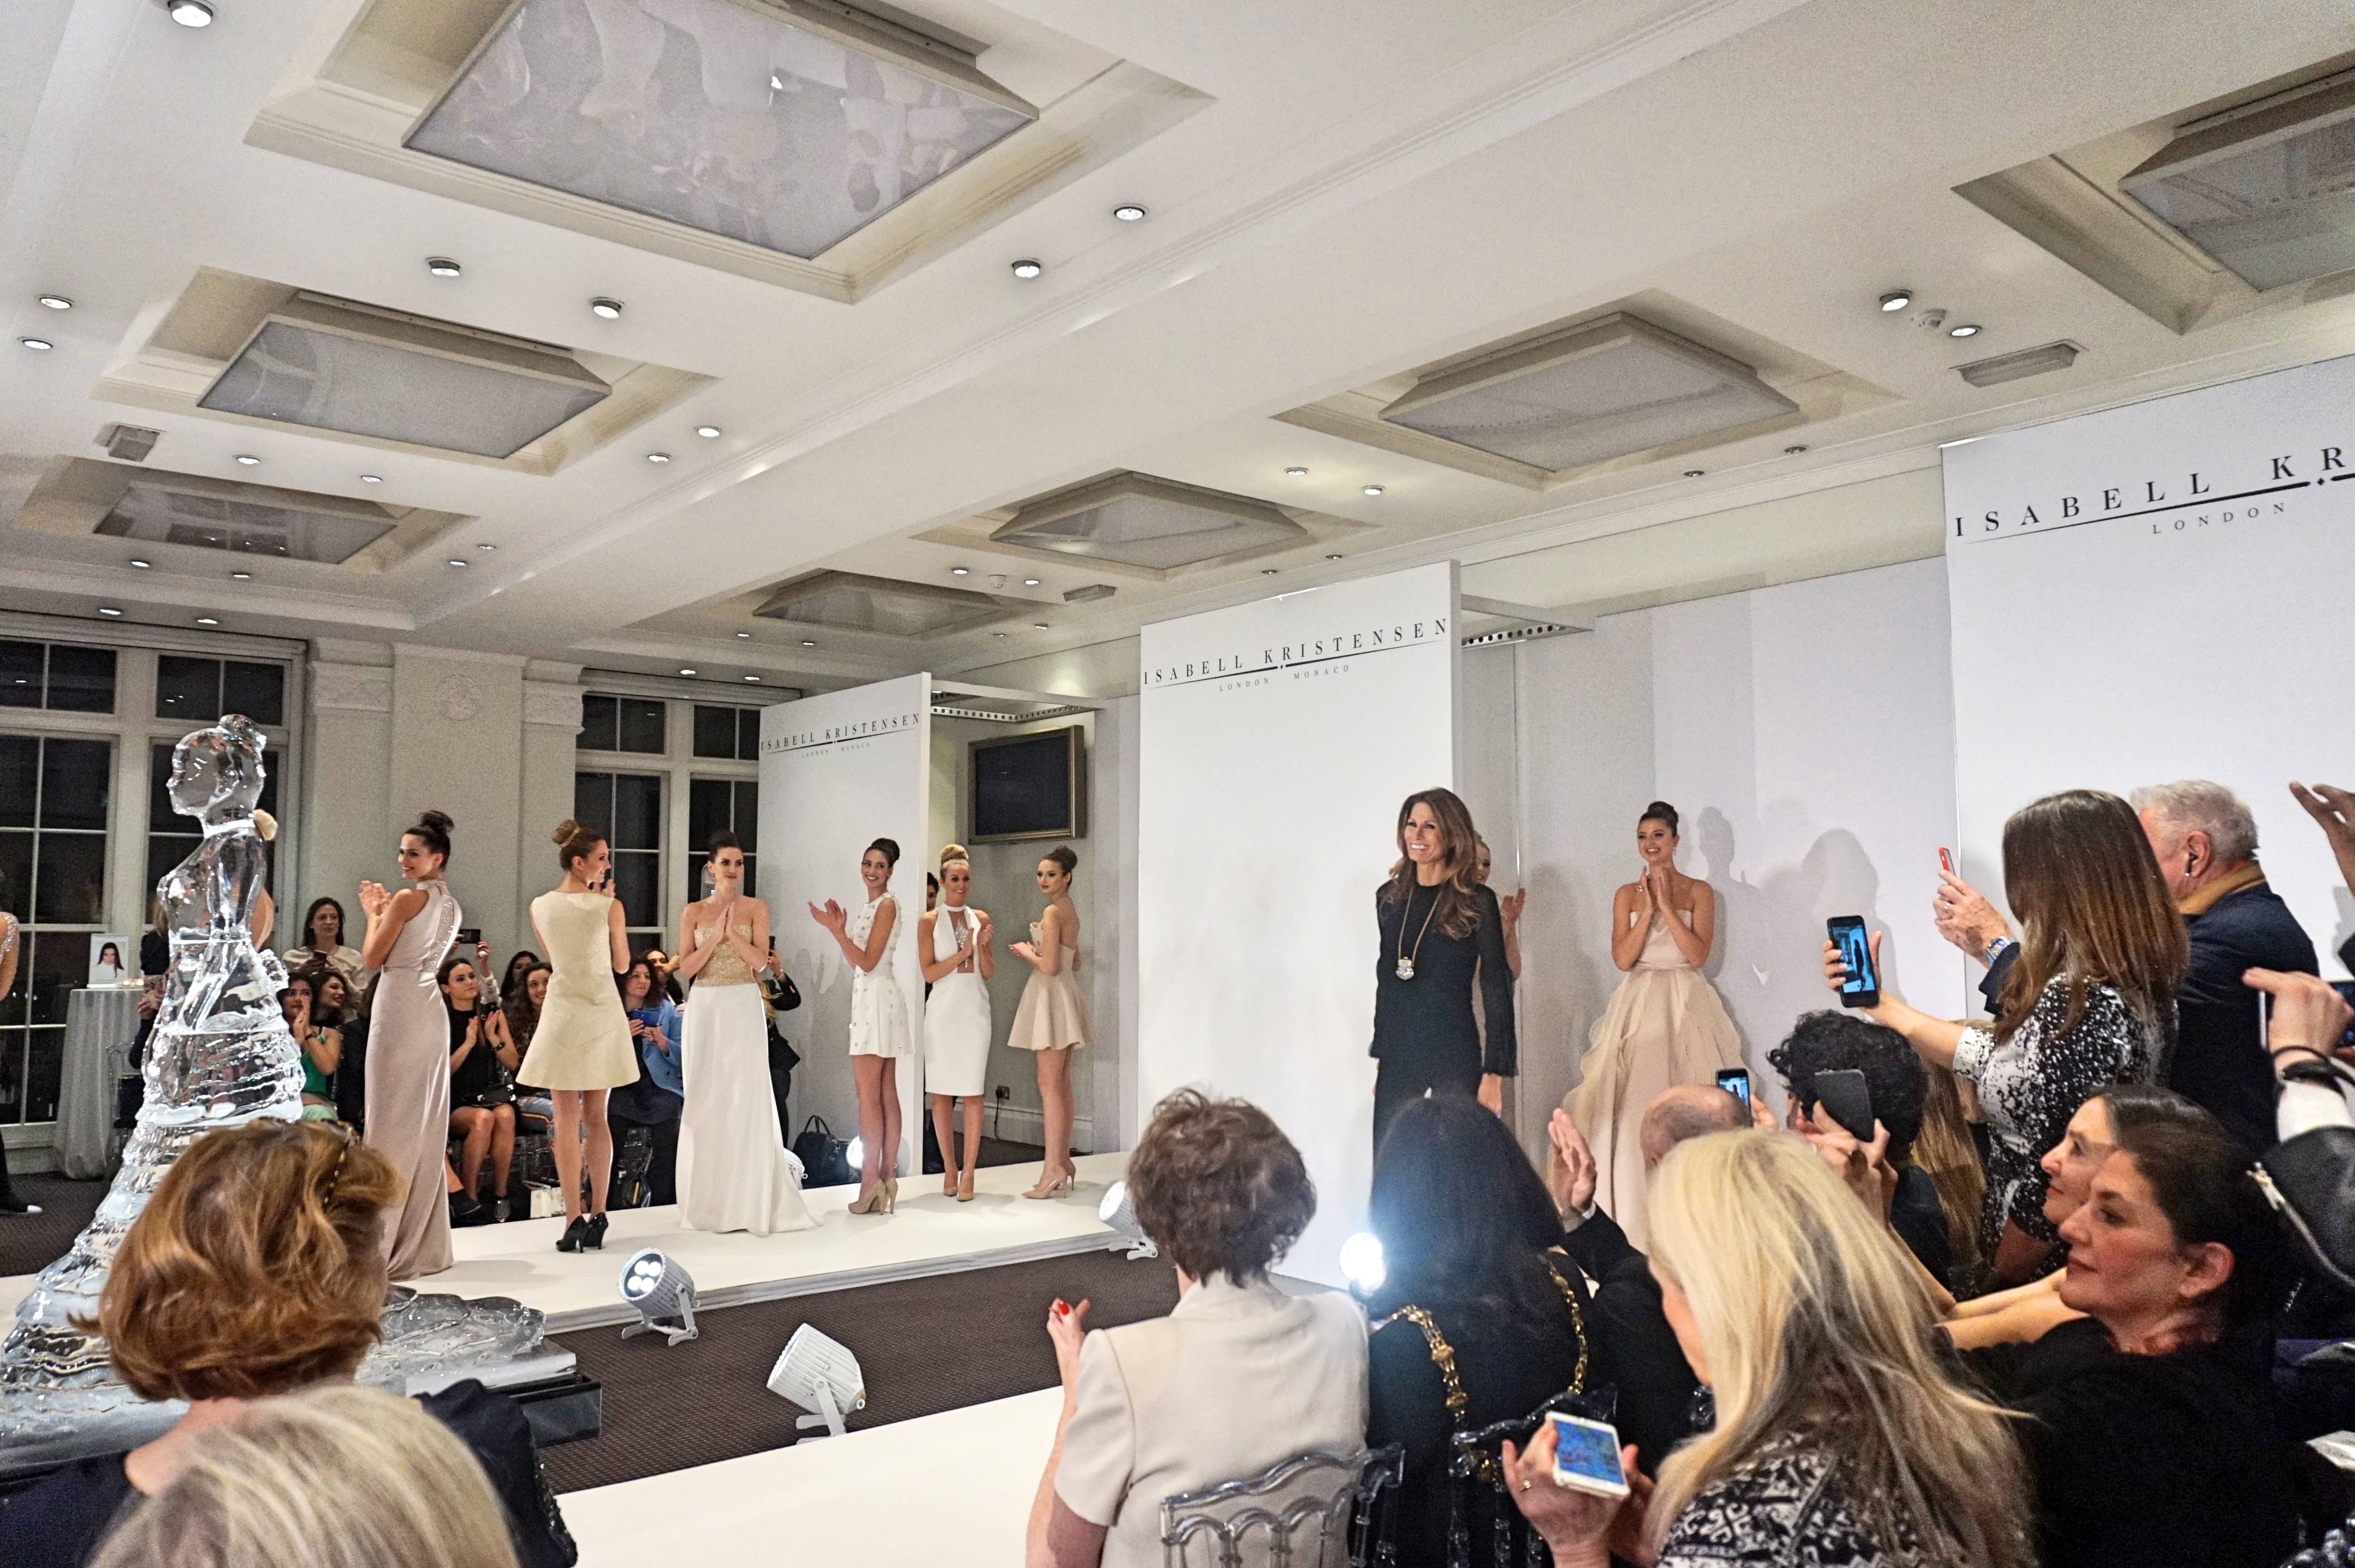 isabell kristensen fashion show - lindsay blogueuse